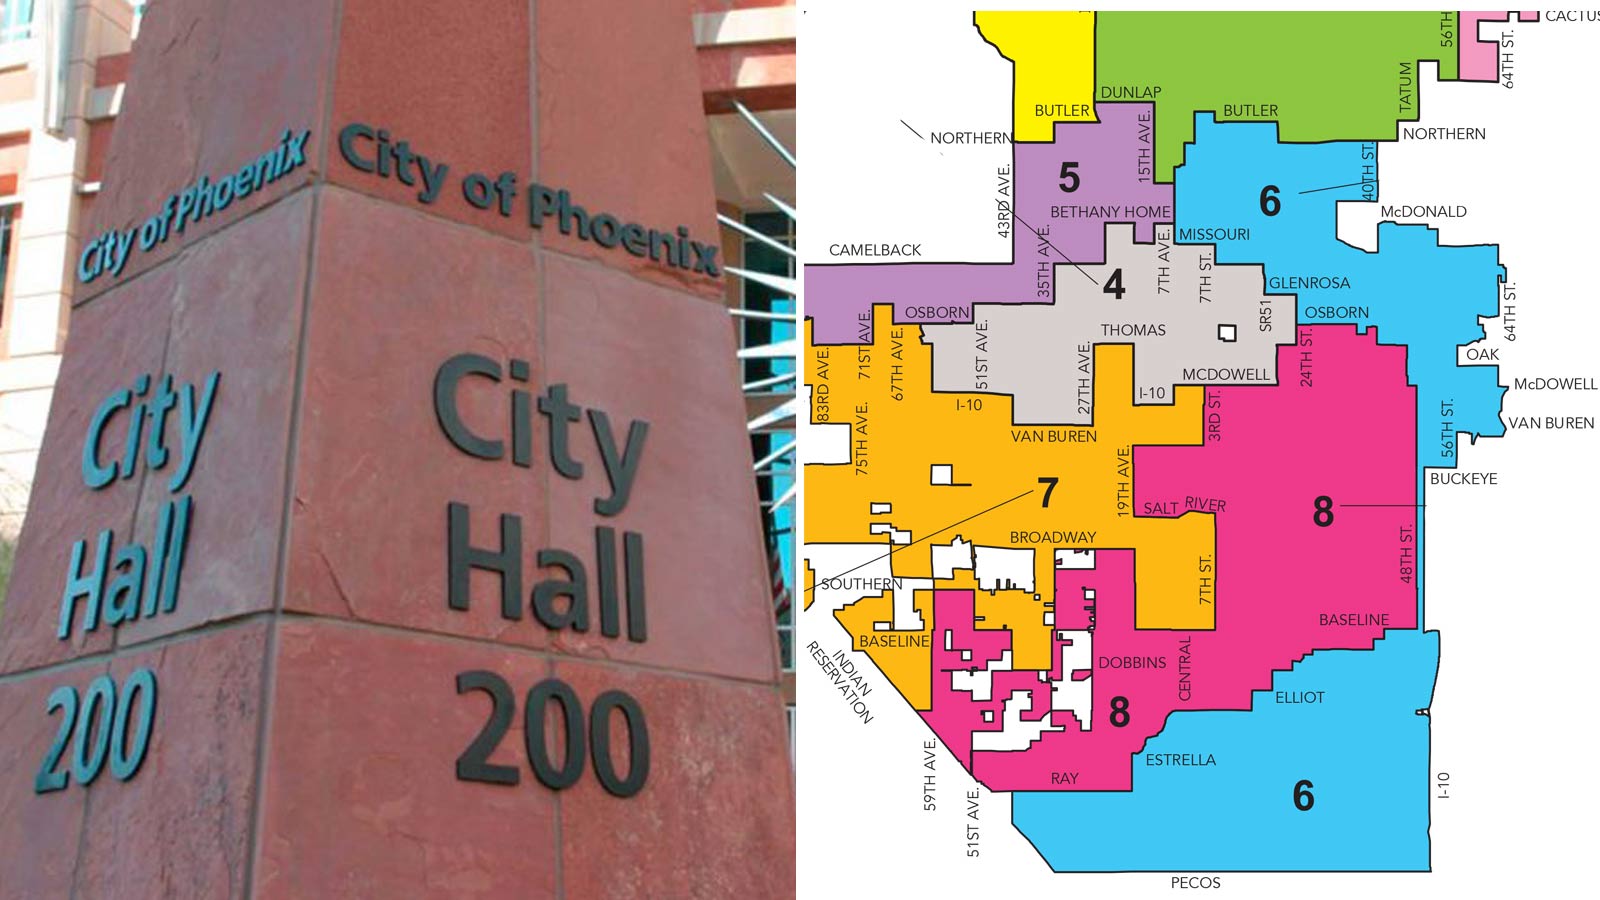 Voters in 2 Phoenix districts to decide city council runoff election